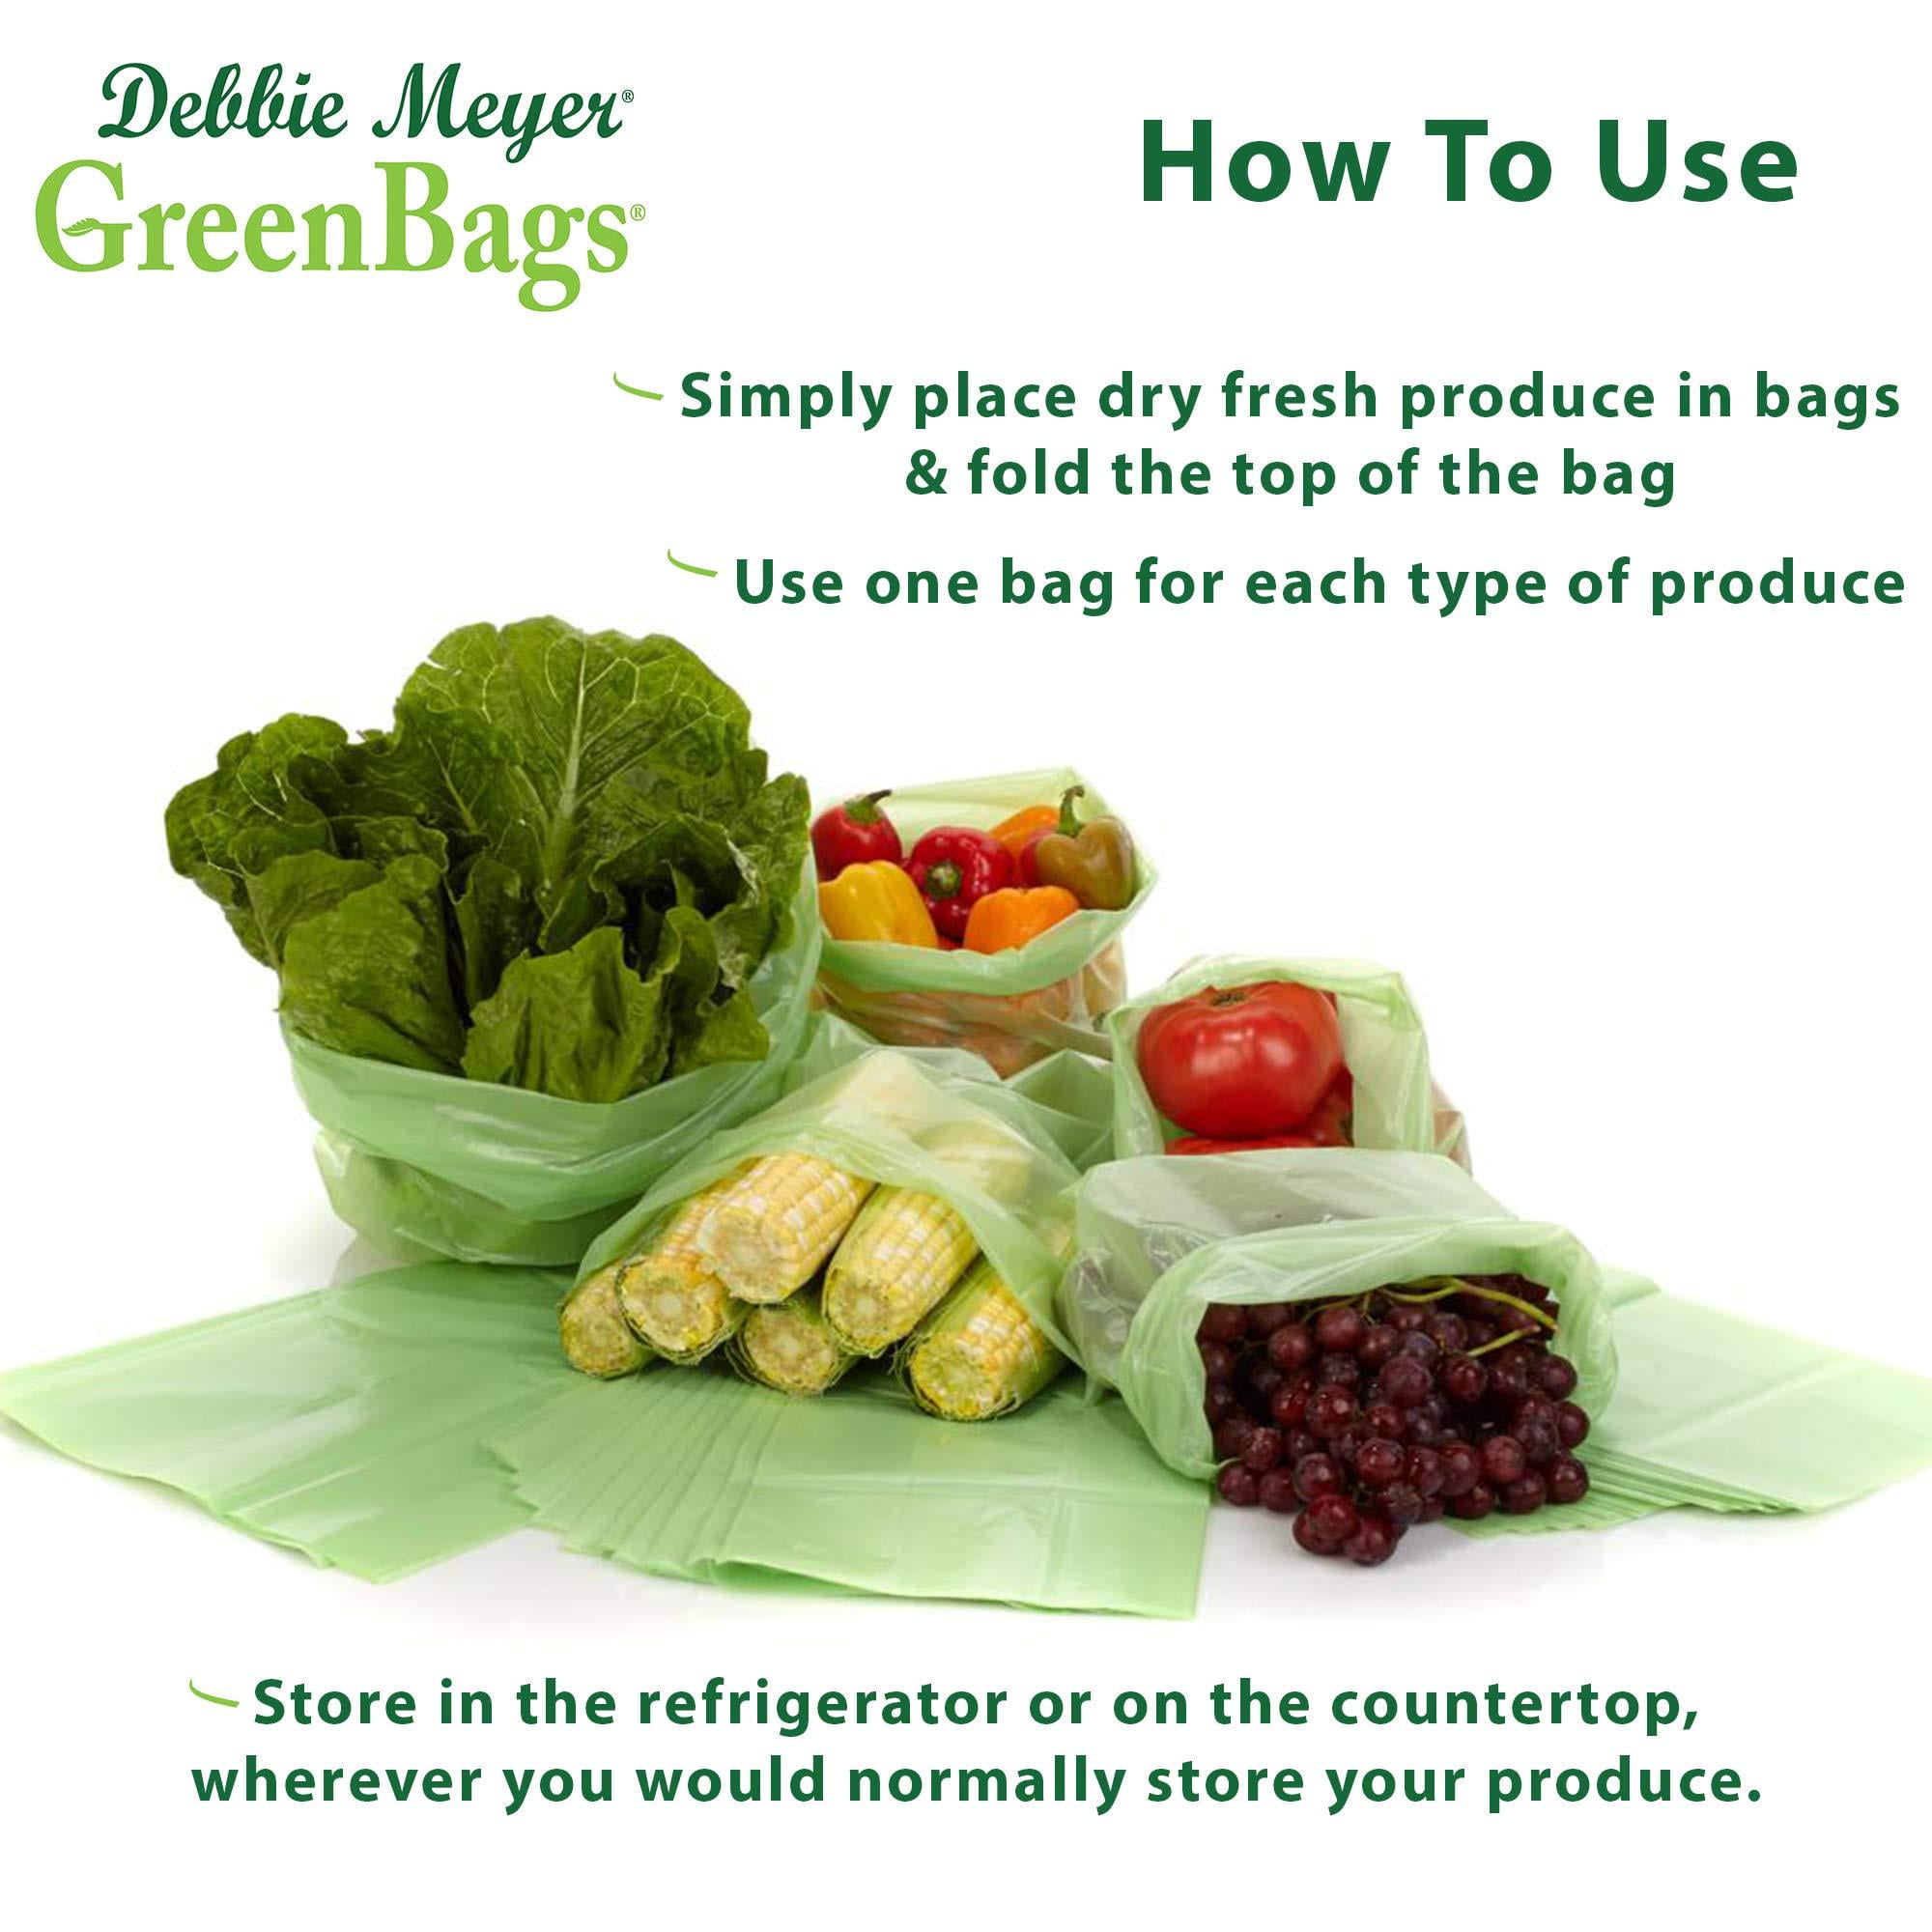 Debbie Meyer GreenBags 32-Pack (16m, 8L, 8XL) Keeps Fruits, Vegetables, and Cut Flowers, Fresh Longer, Reusable, BPA Free, Made in USA